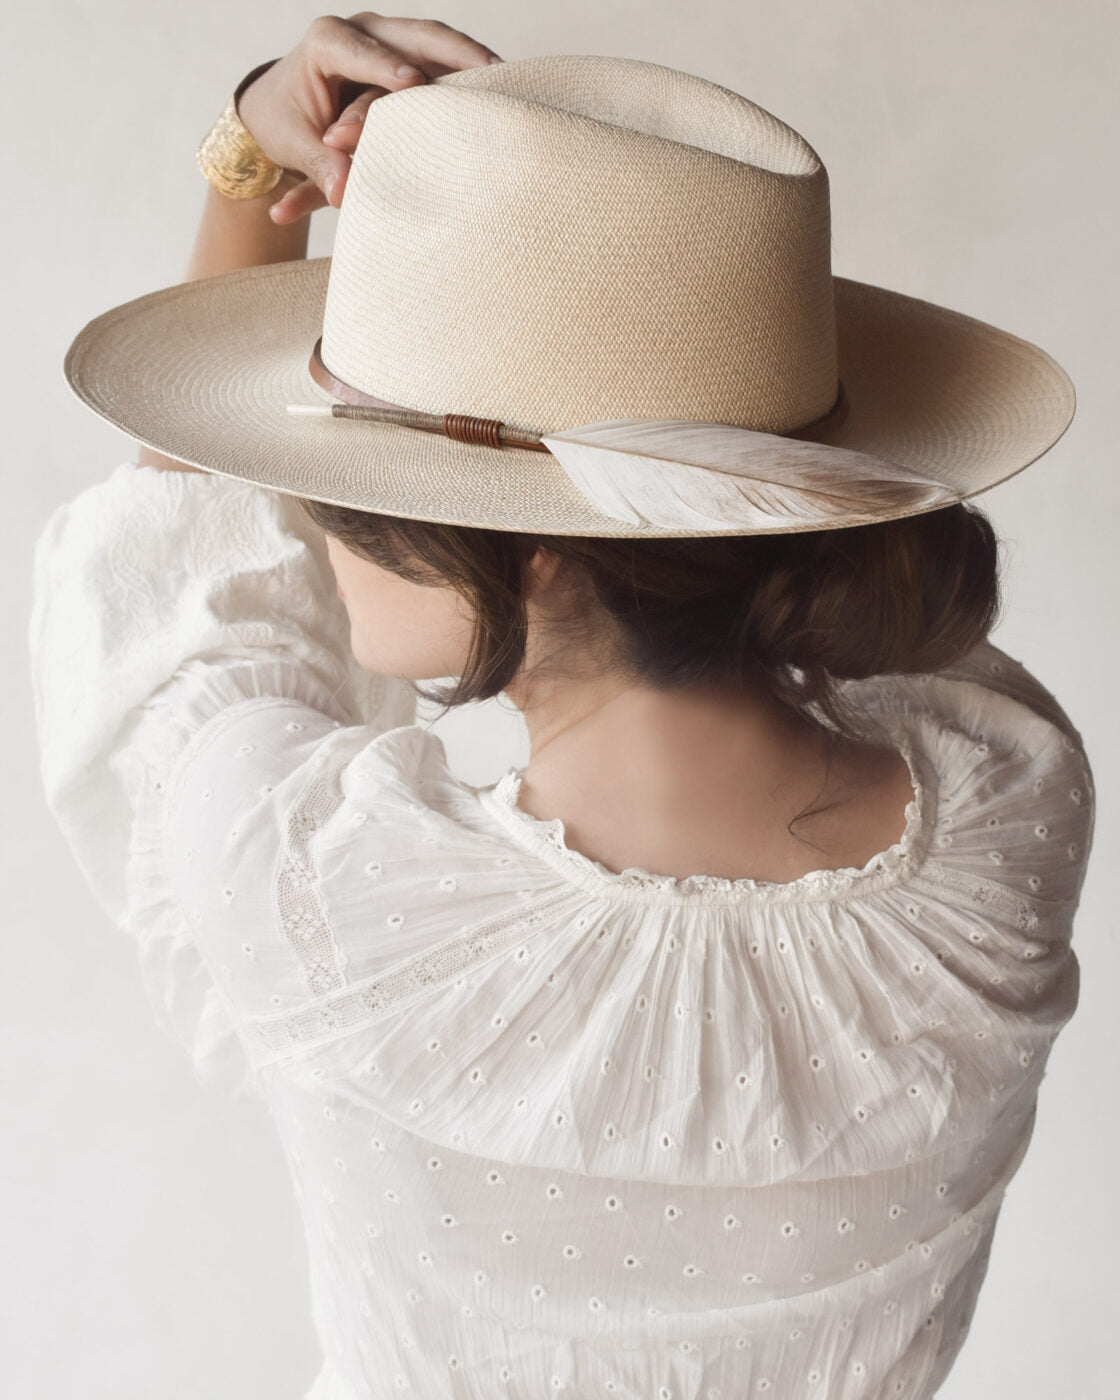 A woman from behind wearing a Ninakuru Matteo XLong Brim made of sustainably harvested Toquilla straw and a white blouse with delicate lace detailing, the focus is on the textures and details of her attire.